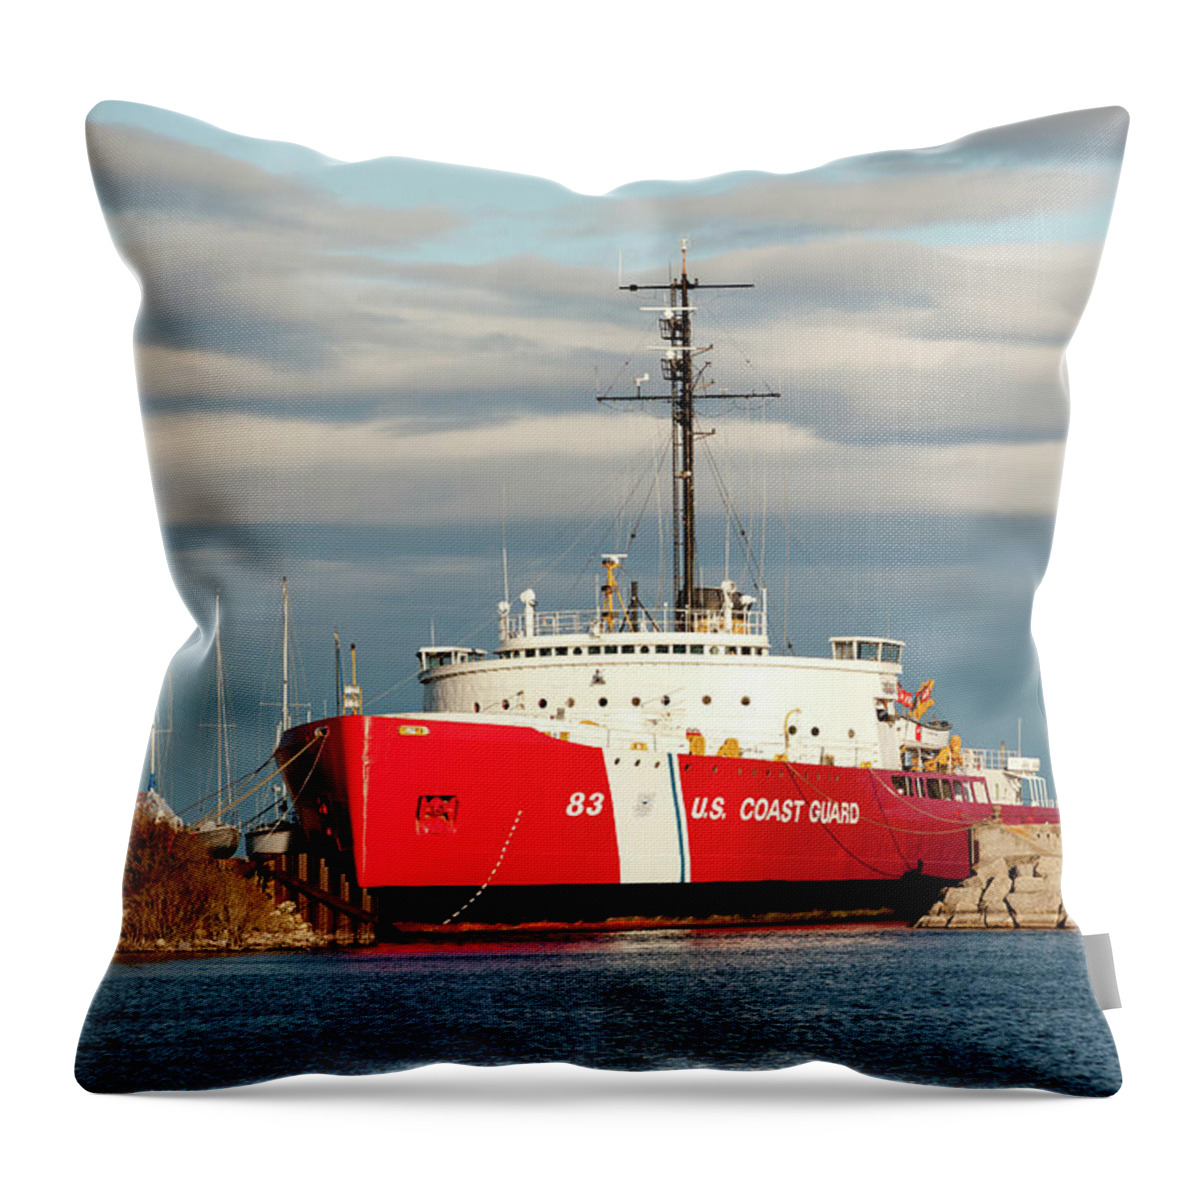 Coast Guard Throw Pillow featuring the photograph Coast Guard Ice Breaker Ship by Rich S